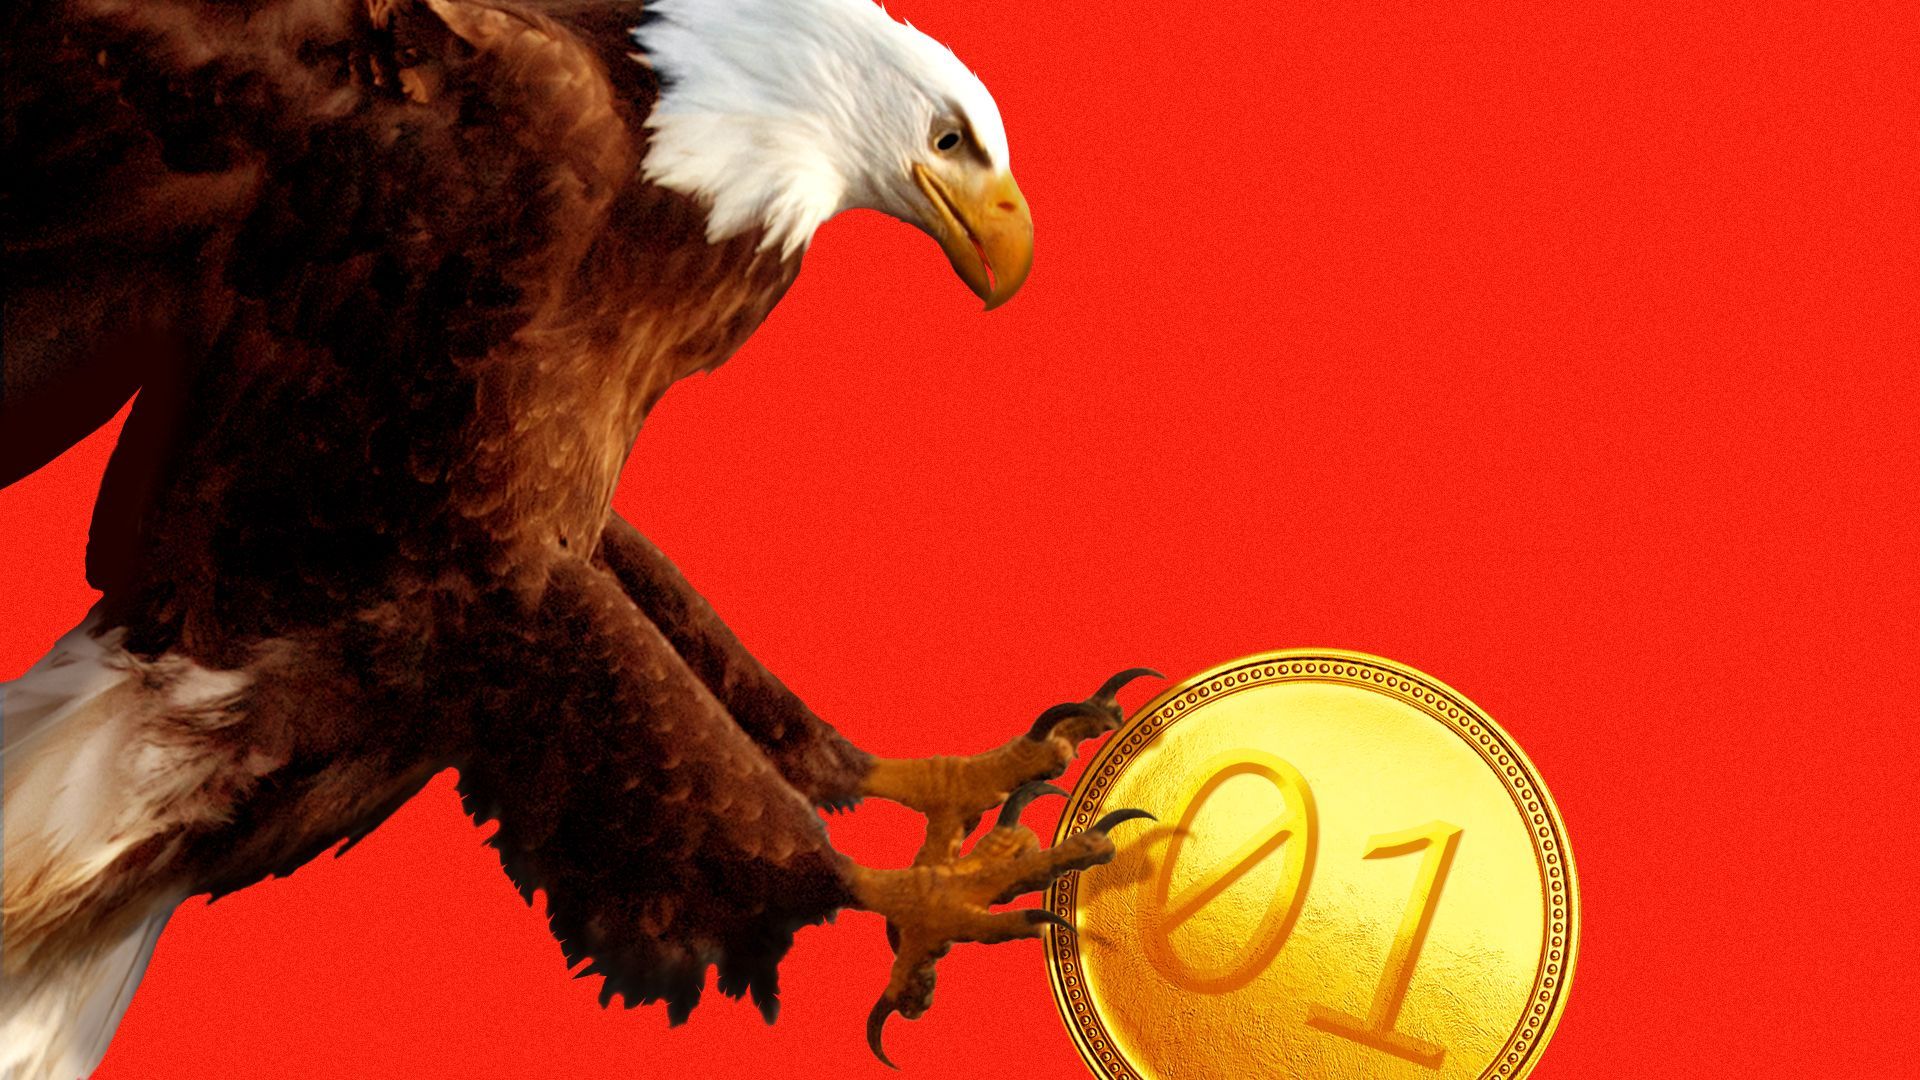 Illustration of a bald eagle flying down to grab a golden coin with binary code